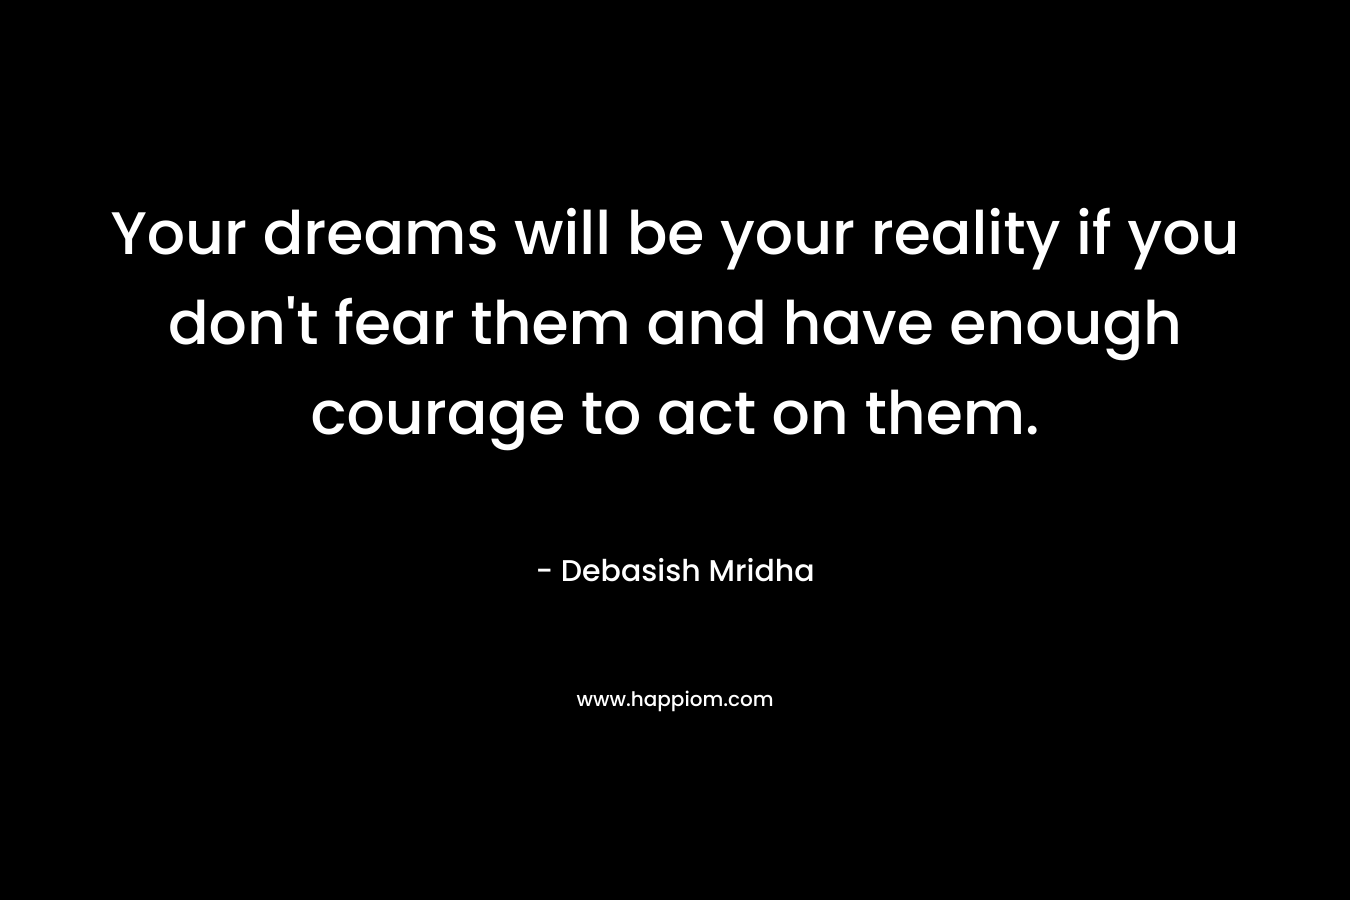 Your dreams will be your reality if you don't fear them and have enough courage to act on them.